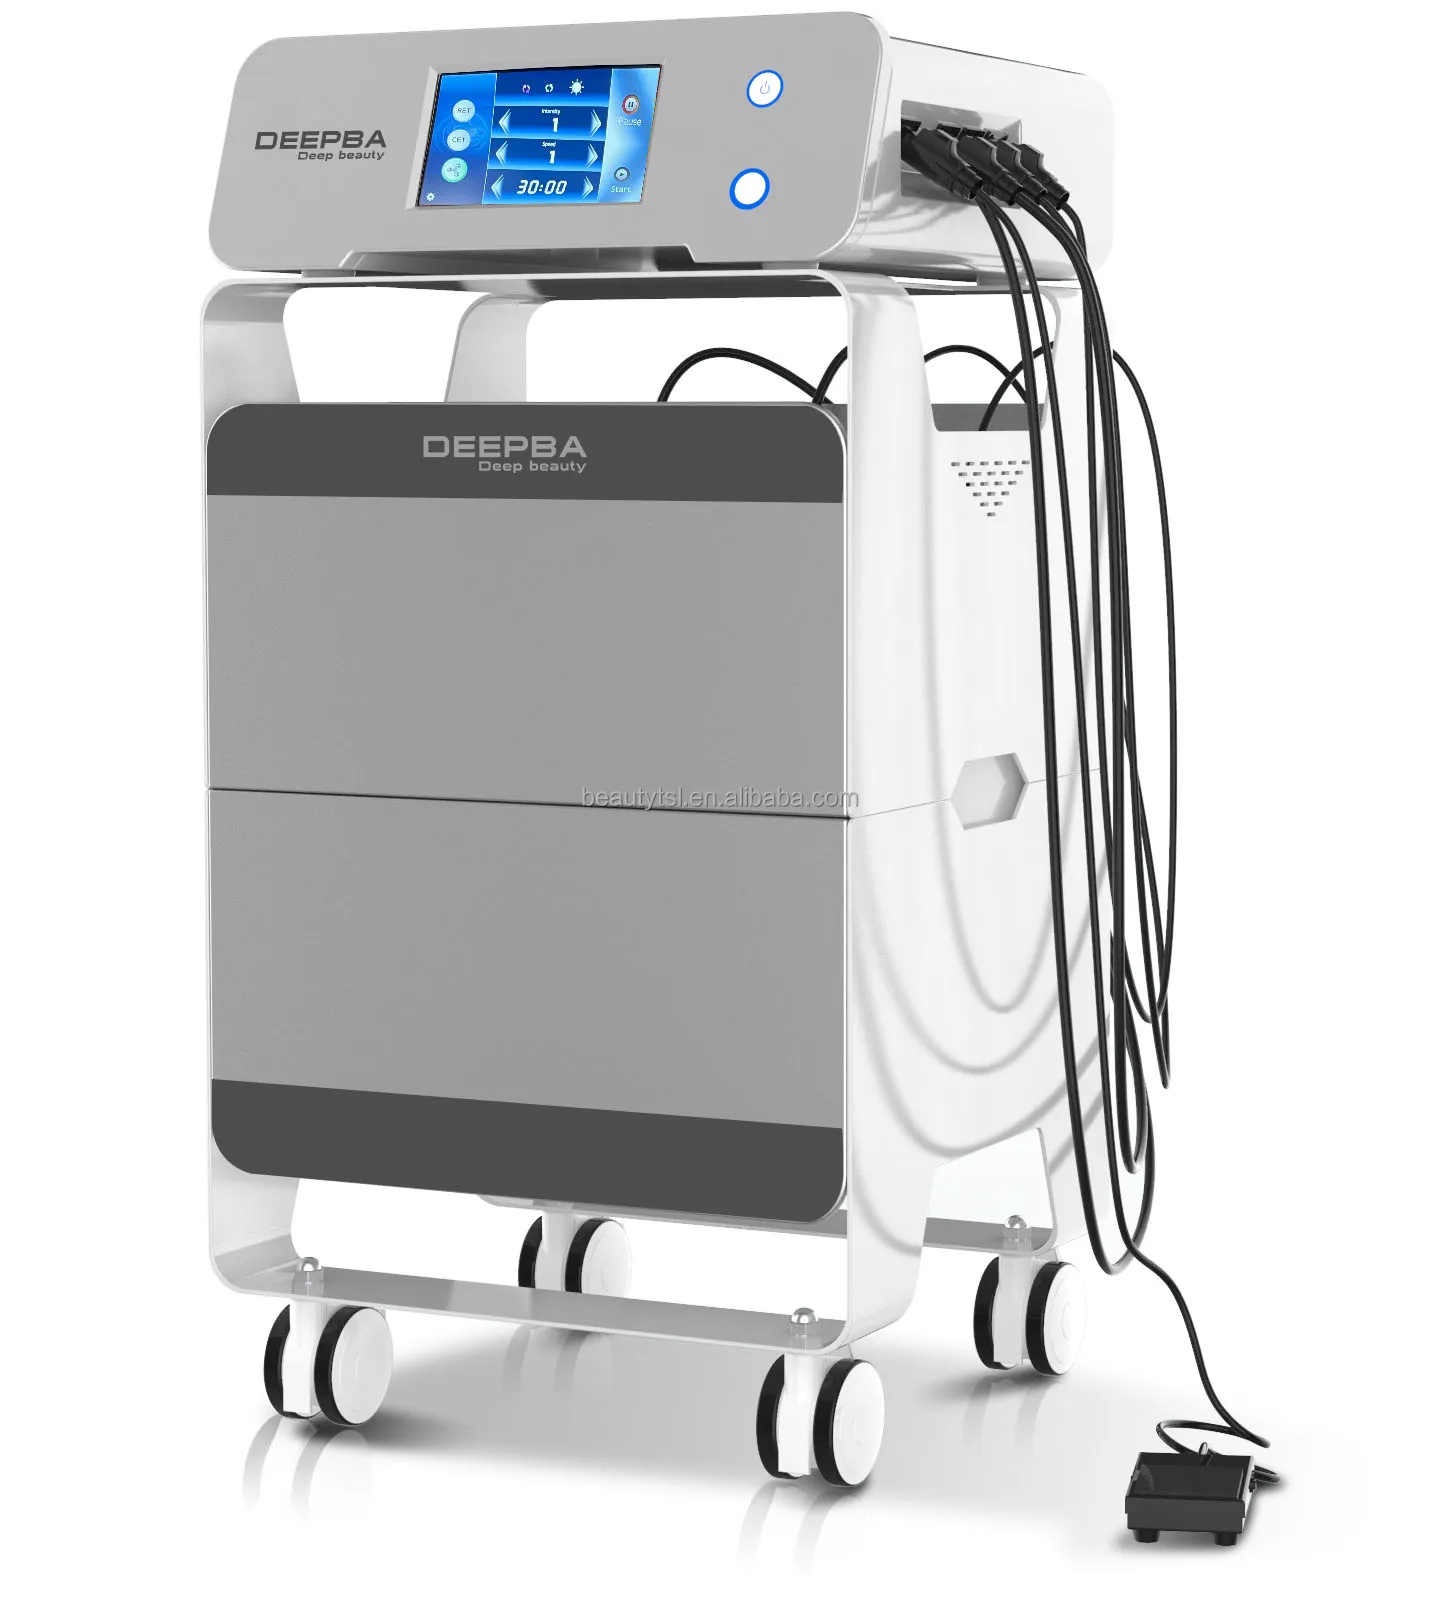 Professional 448khz+20khz Double Wave Deepba Fat Burning Indiba RET CAT therapy With 3 Pole RF Handle deepba